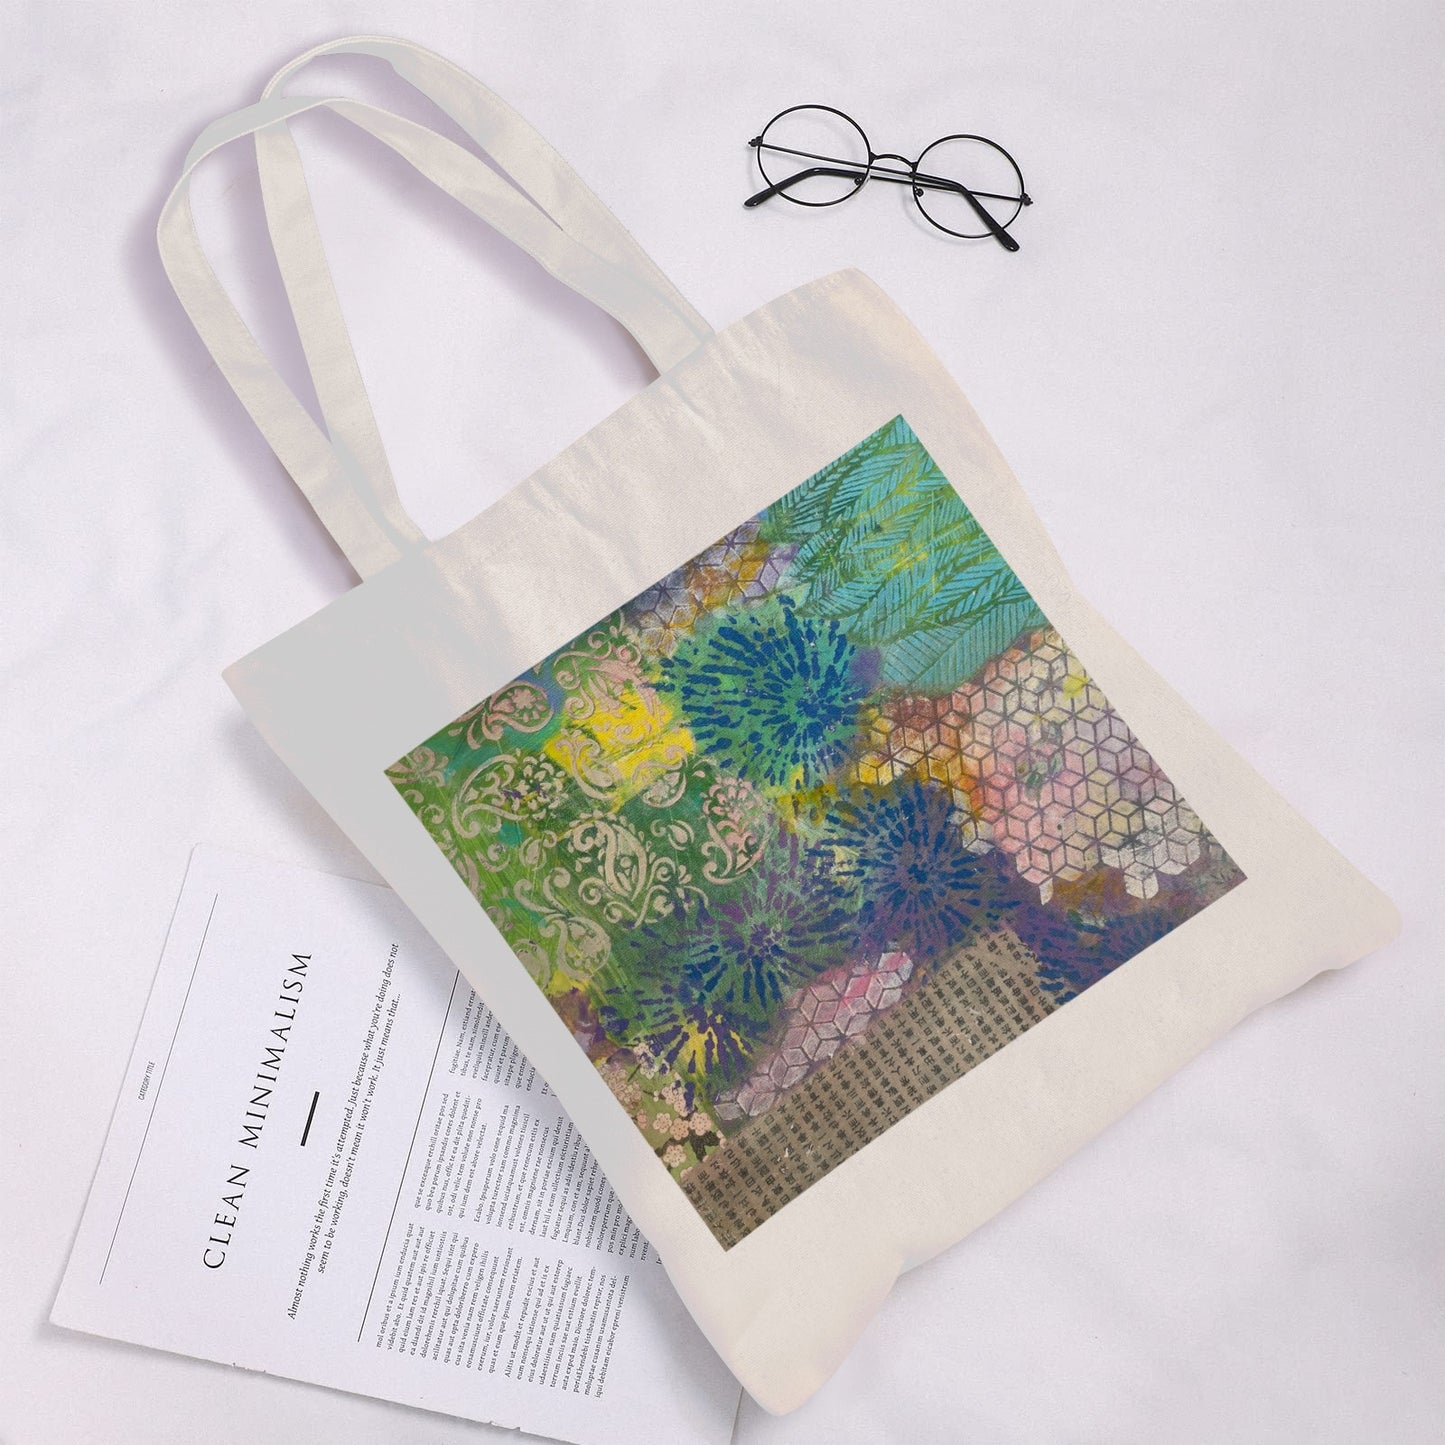 Cotton Tote Bag - Two sided